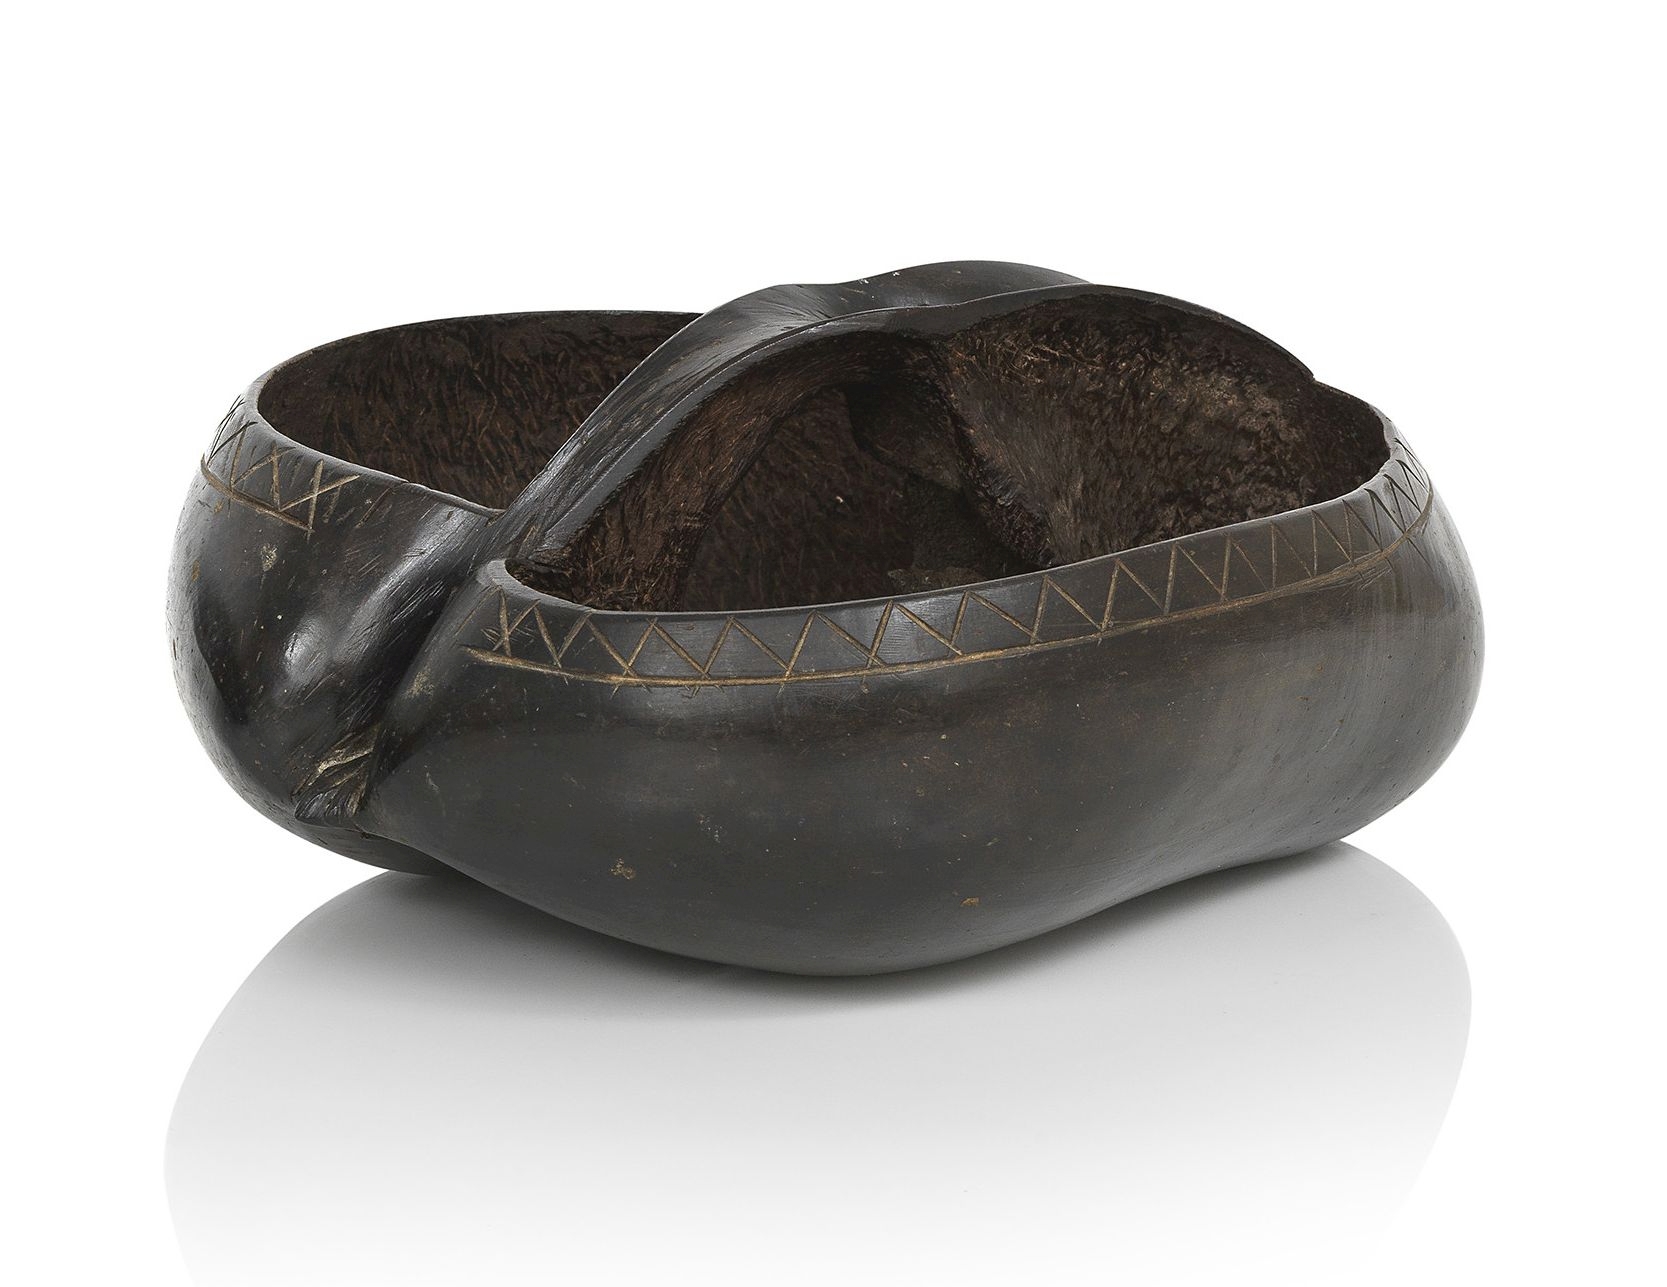 A carved and polished Coco de Mer nutshell (Lodoicea Maldivica) formed as a basket